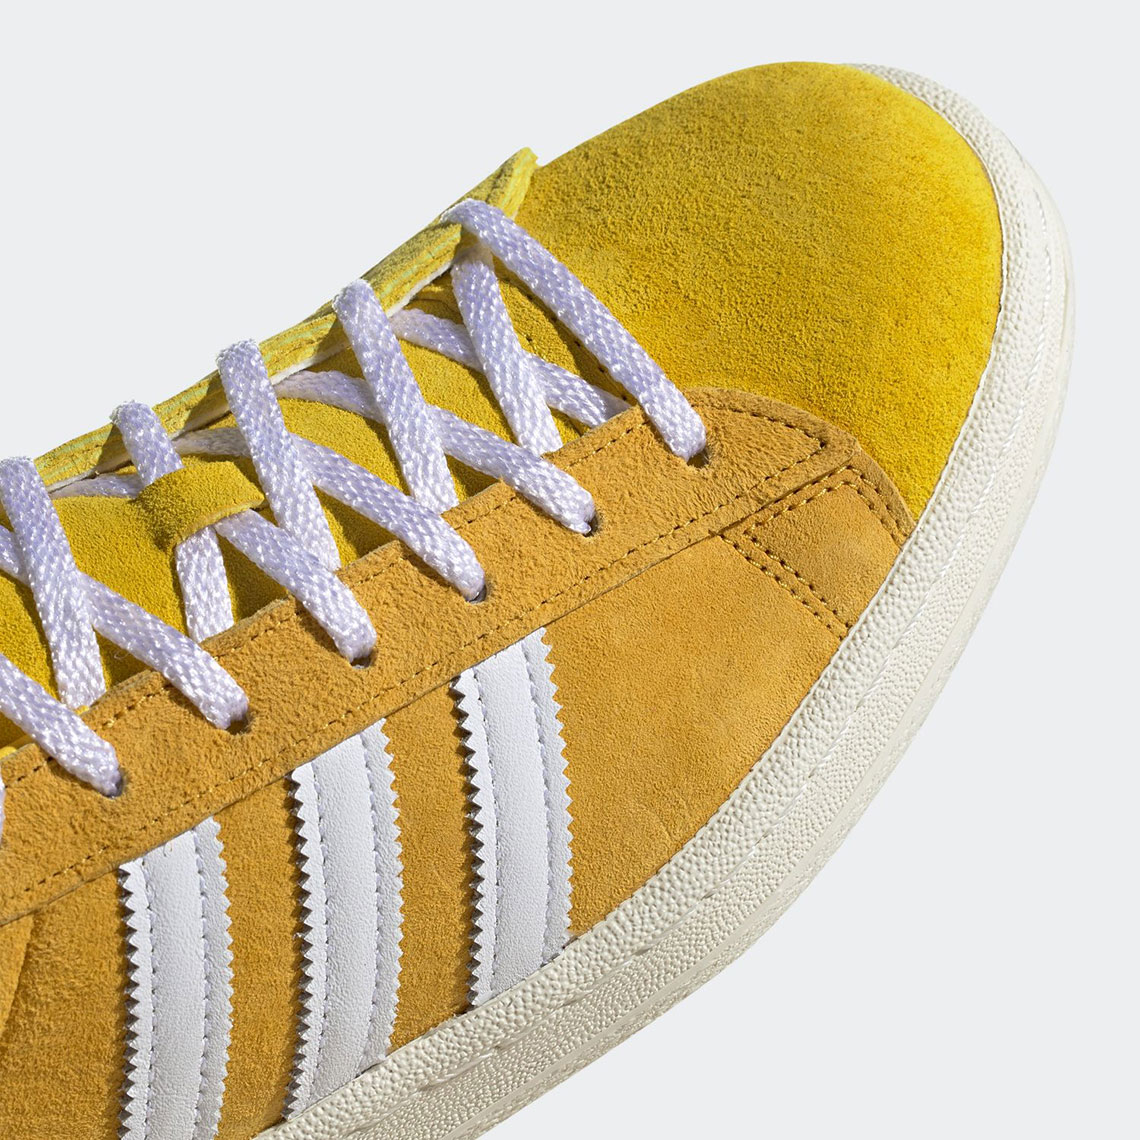 adidas Campus 80s Bold Gold/Cloud White FX5443 |SneakerNews.com